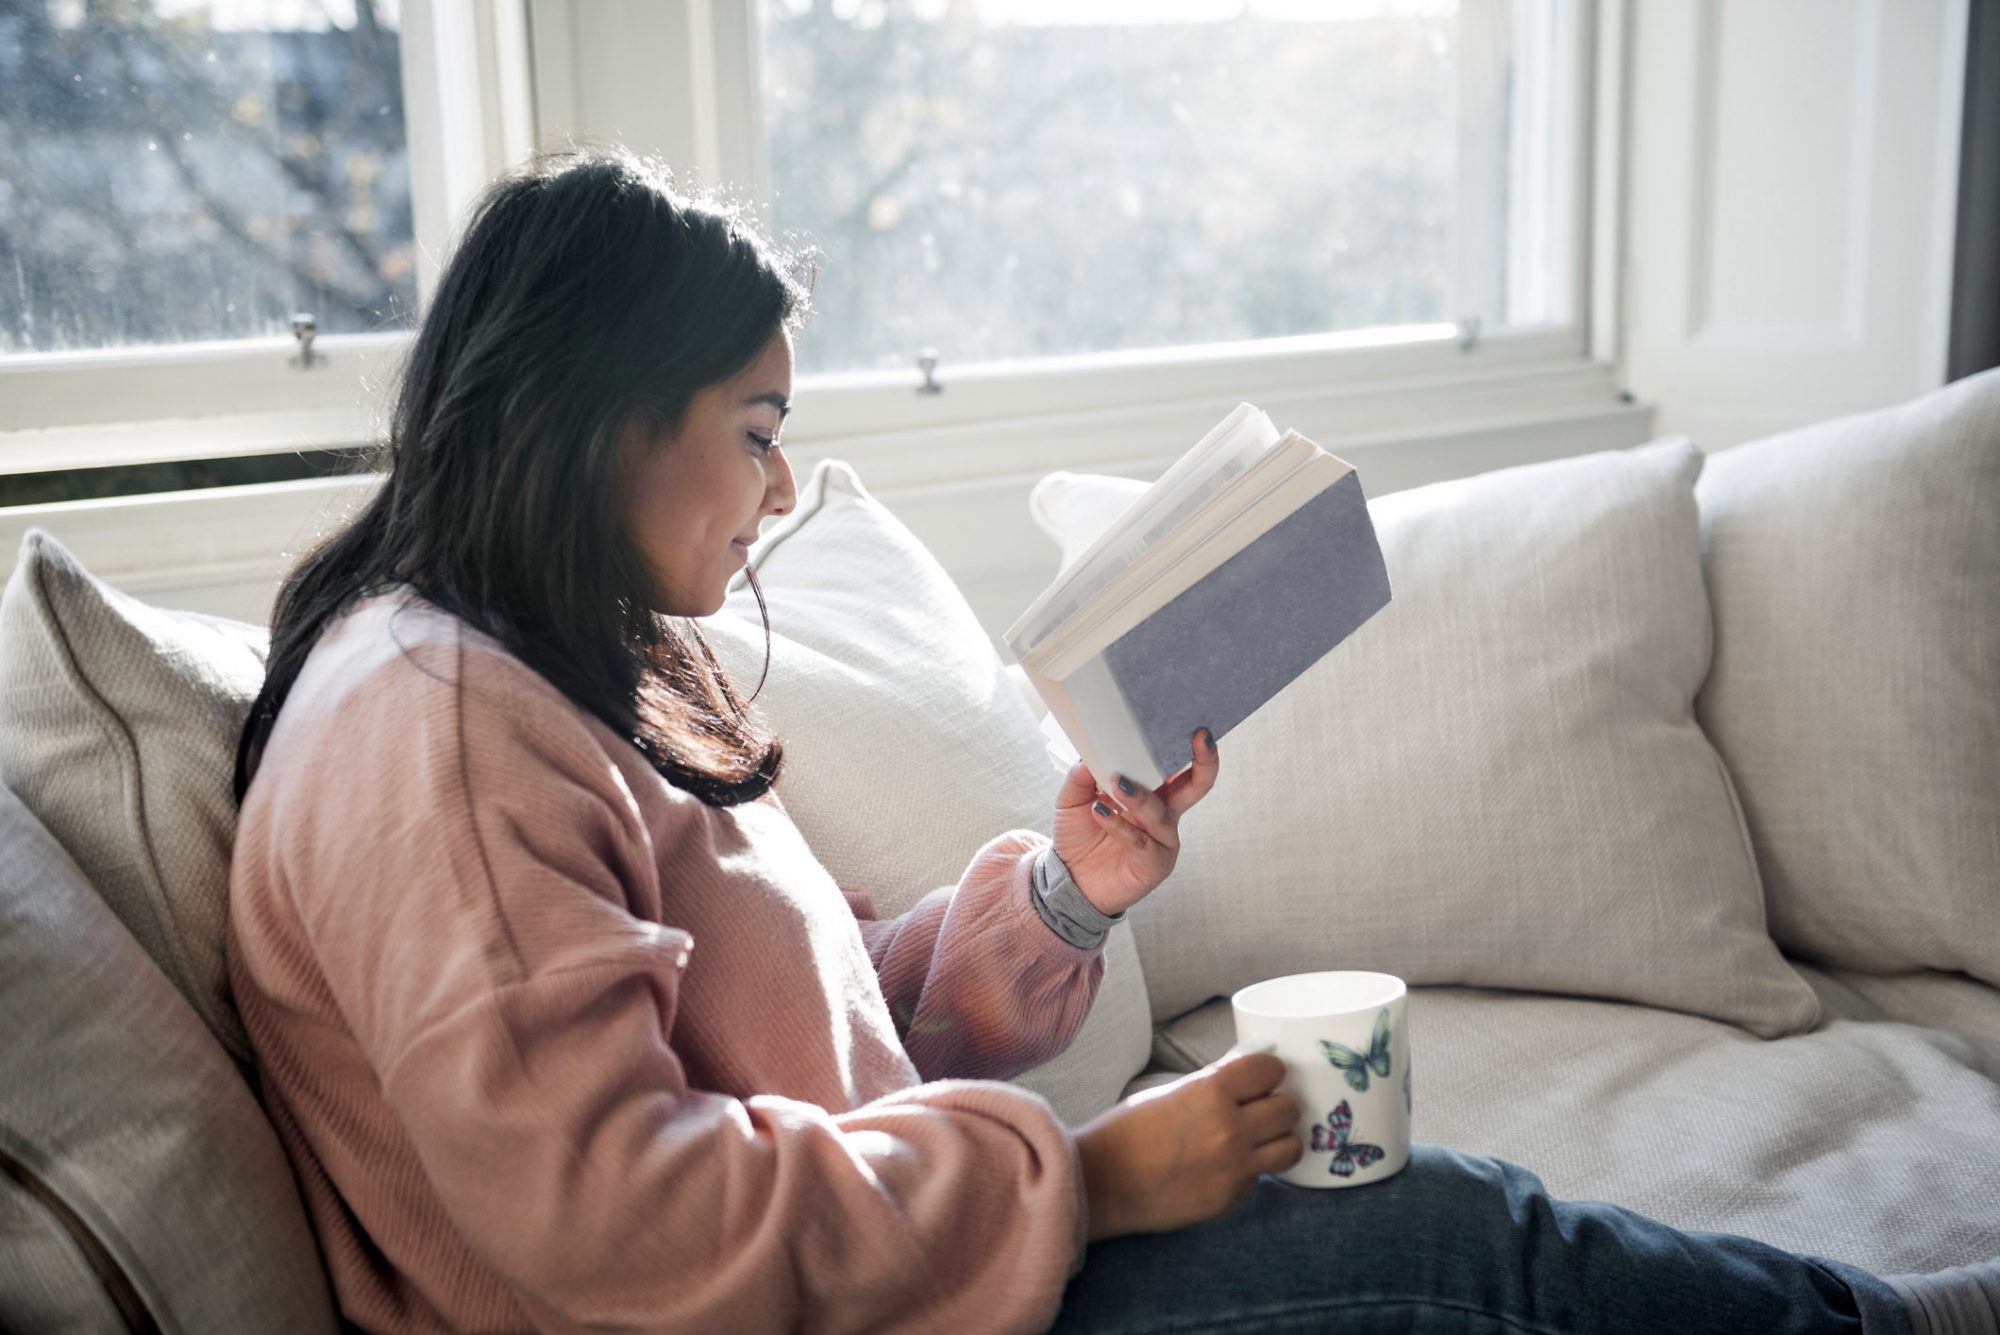 An image of a woman reading on her couch.